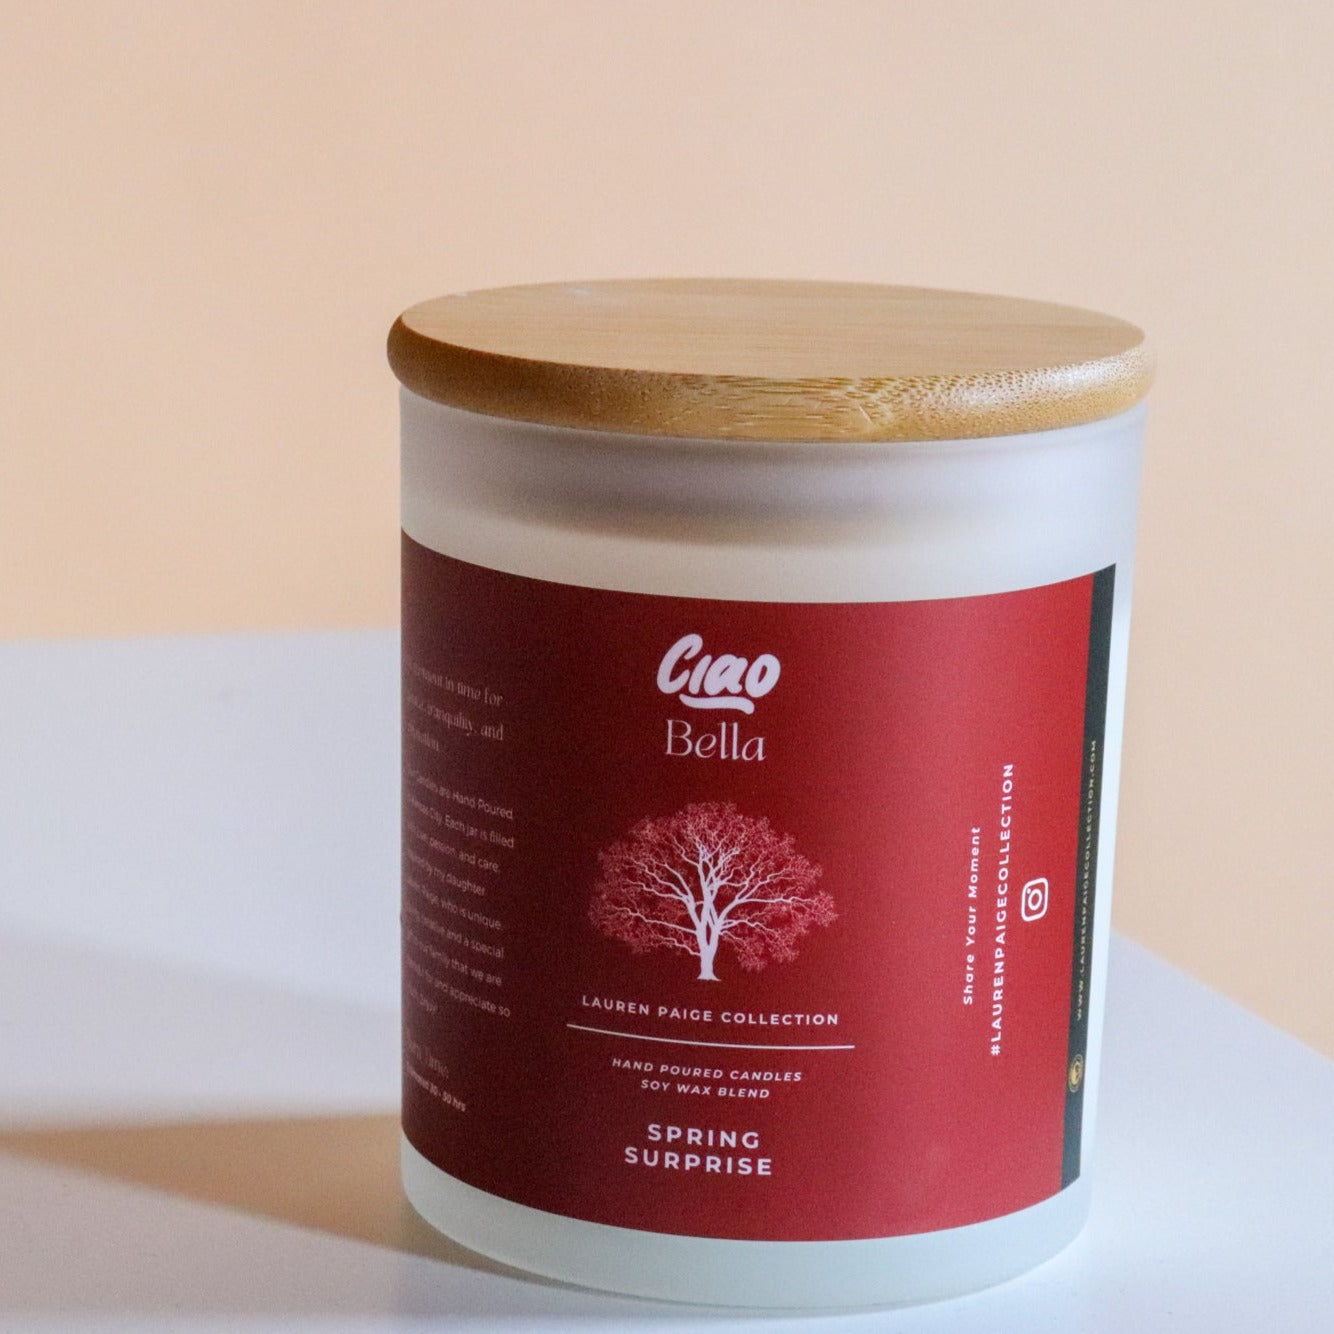 Ciao Bella | Spring Surprise Collection | Soy + Coconut Wax Blend